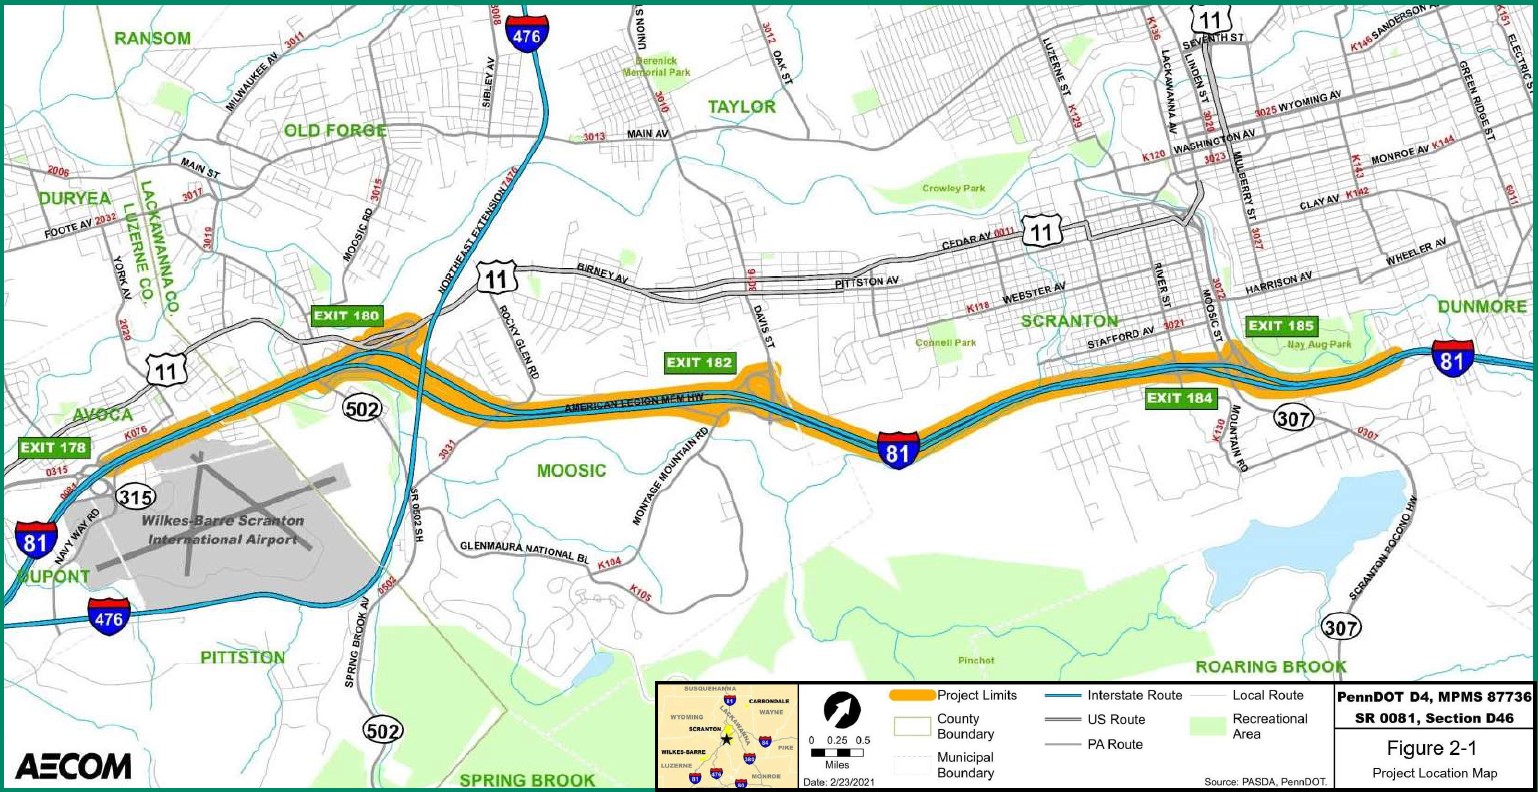 I-81 Avoca to Scranton Virtual Plans Display_Project Overview Map.jpg